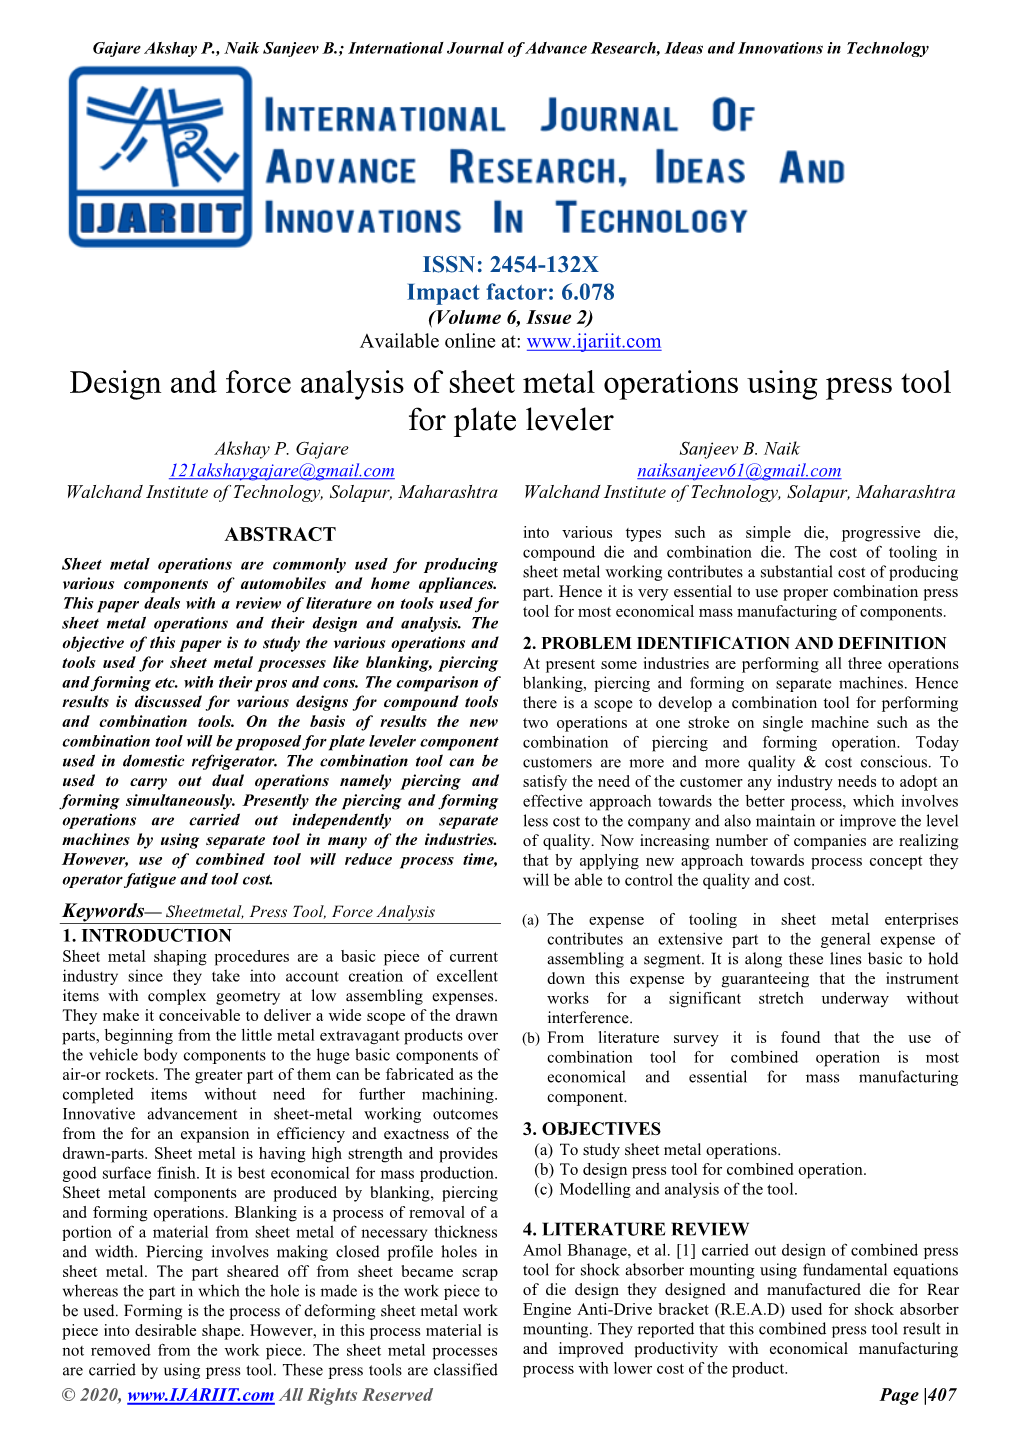 Design and Force Analysis of Sheet Metal Operations Using Press Tool for Plate Leveler Akshay P